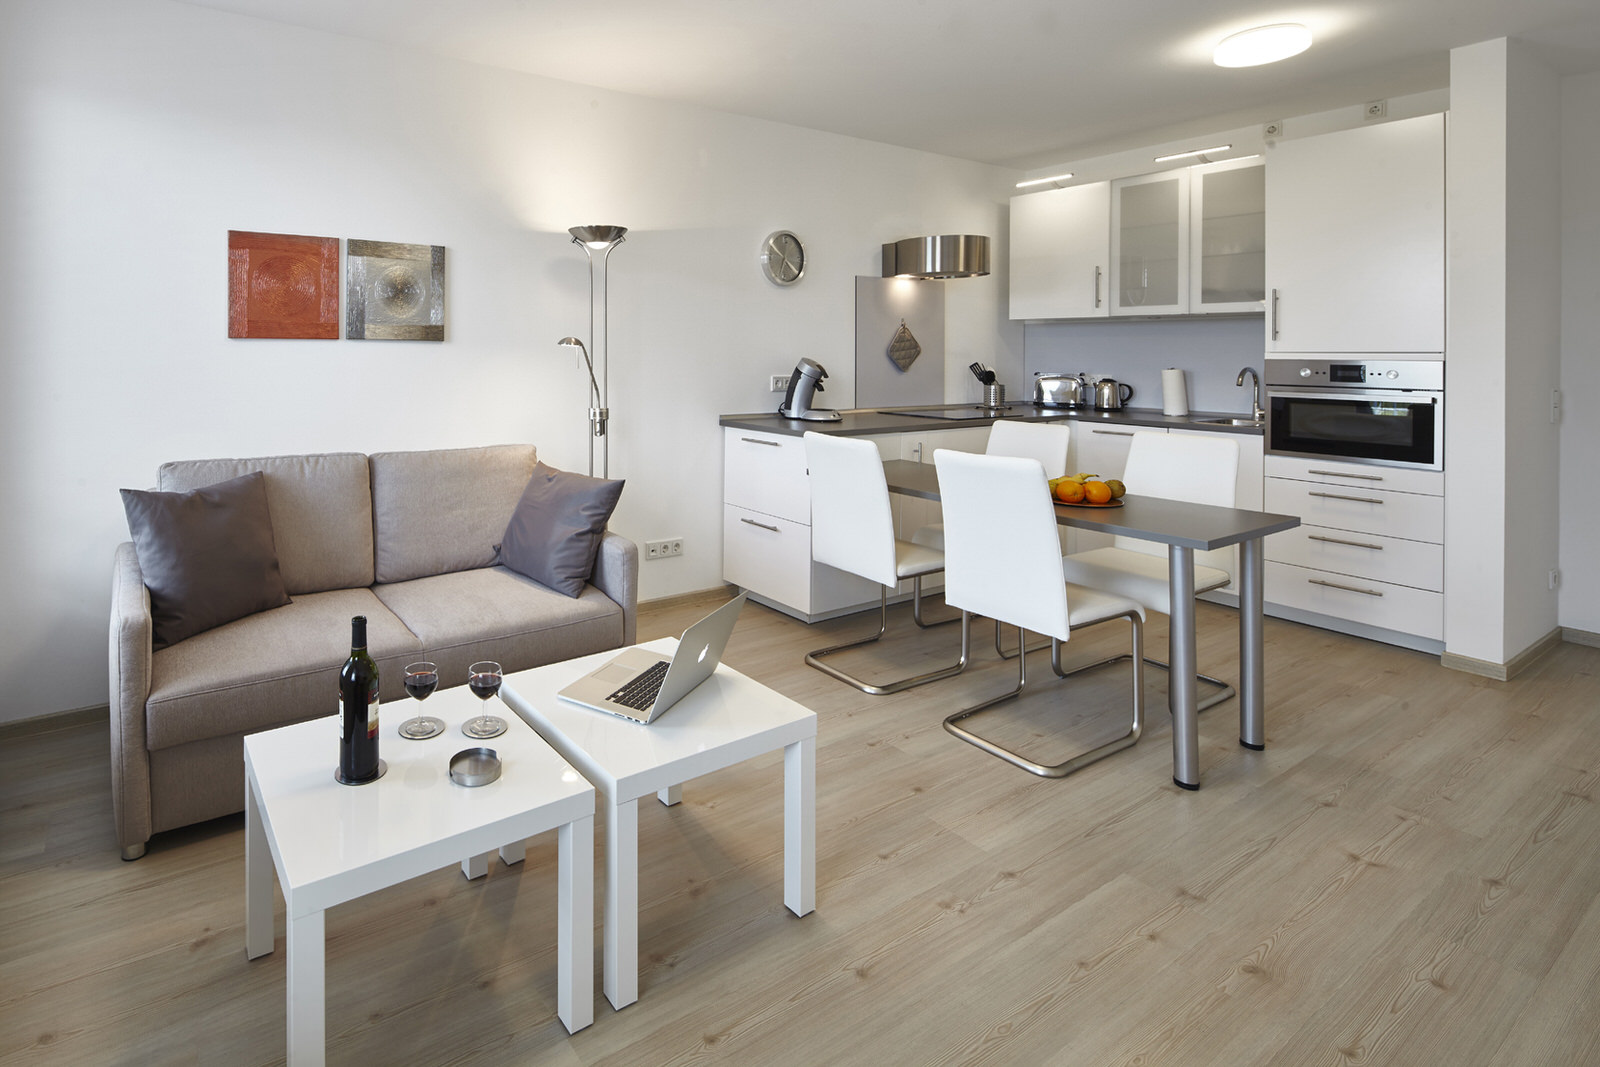 Bobinet Square: Move in and enjoy